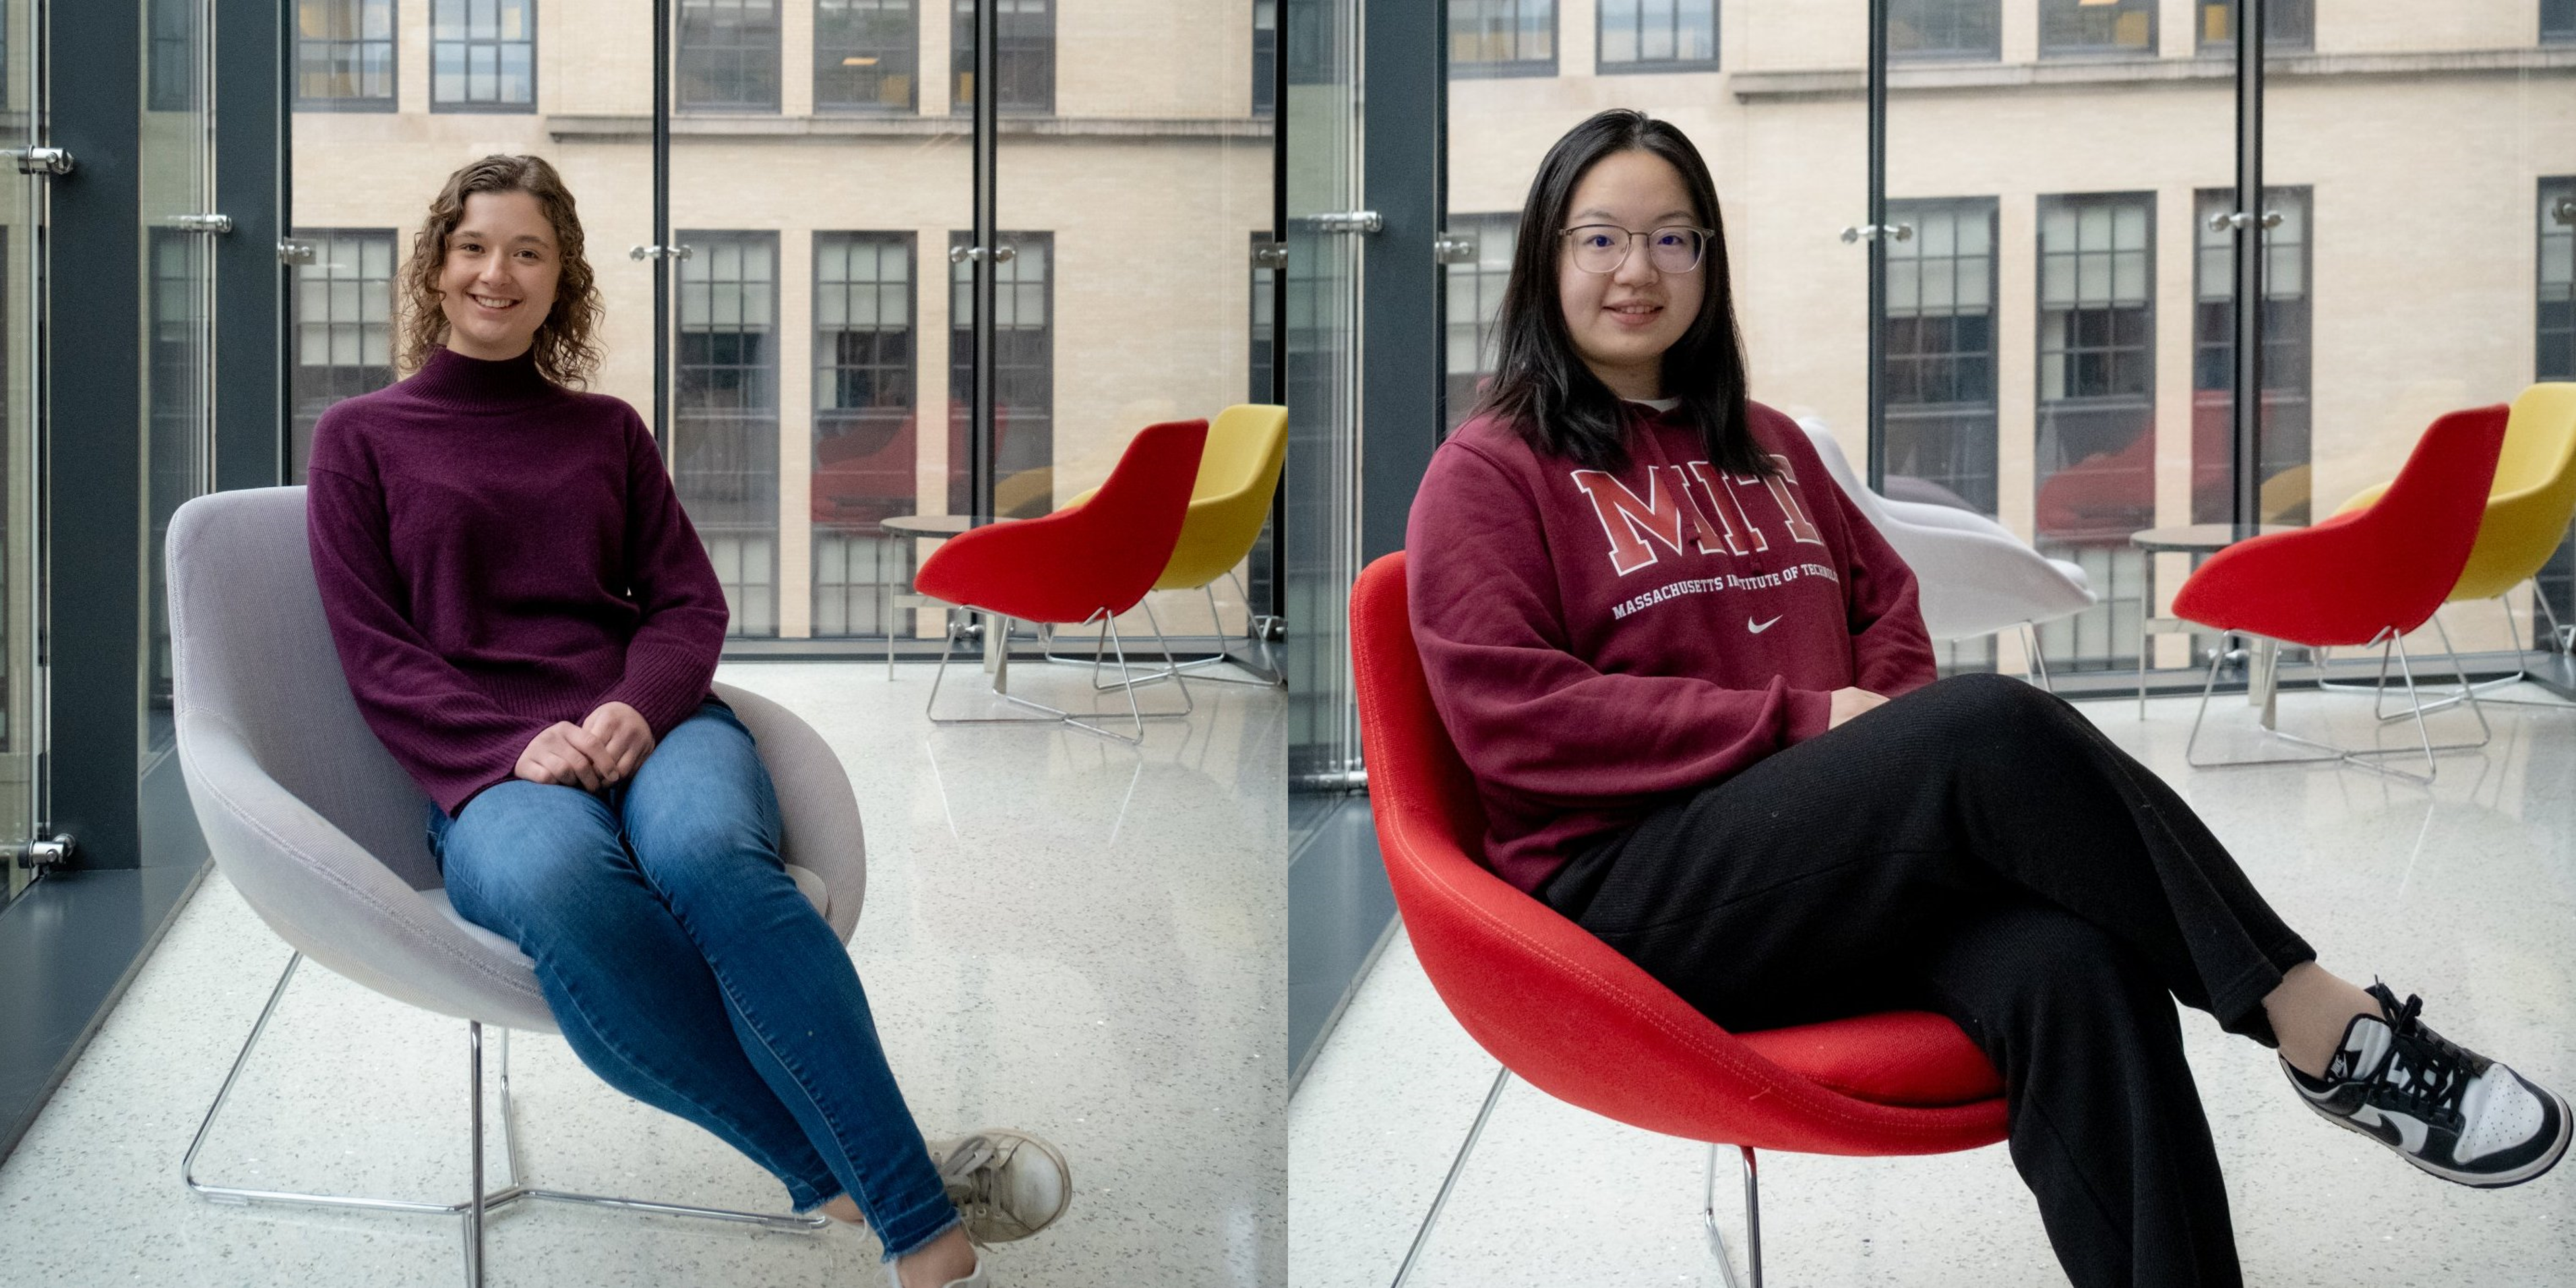 Congratulations to Longlong and Miranda for being selected for student highlights by Semiconductor Research Consortium! Keep up your great work on electrochemical synapses, Longlong and Miranda!